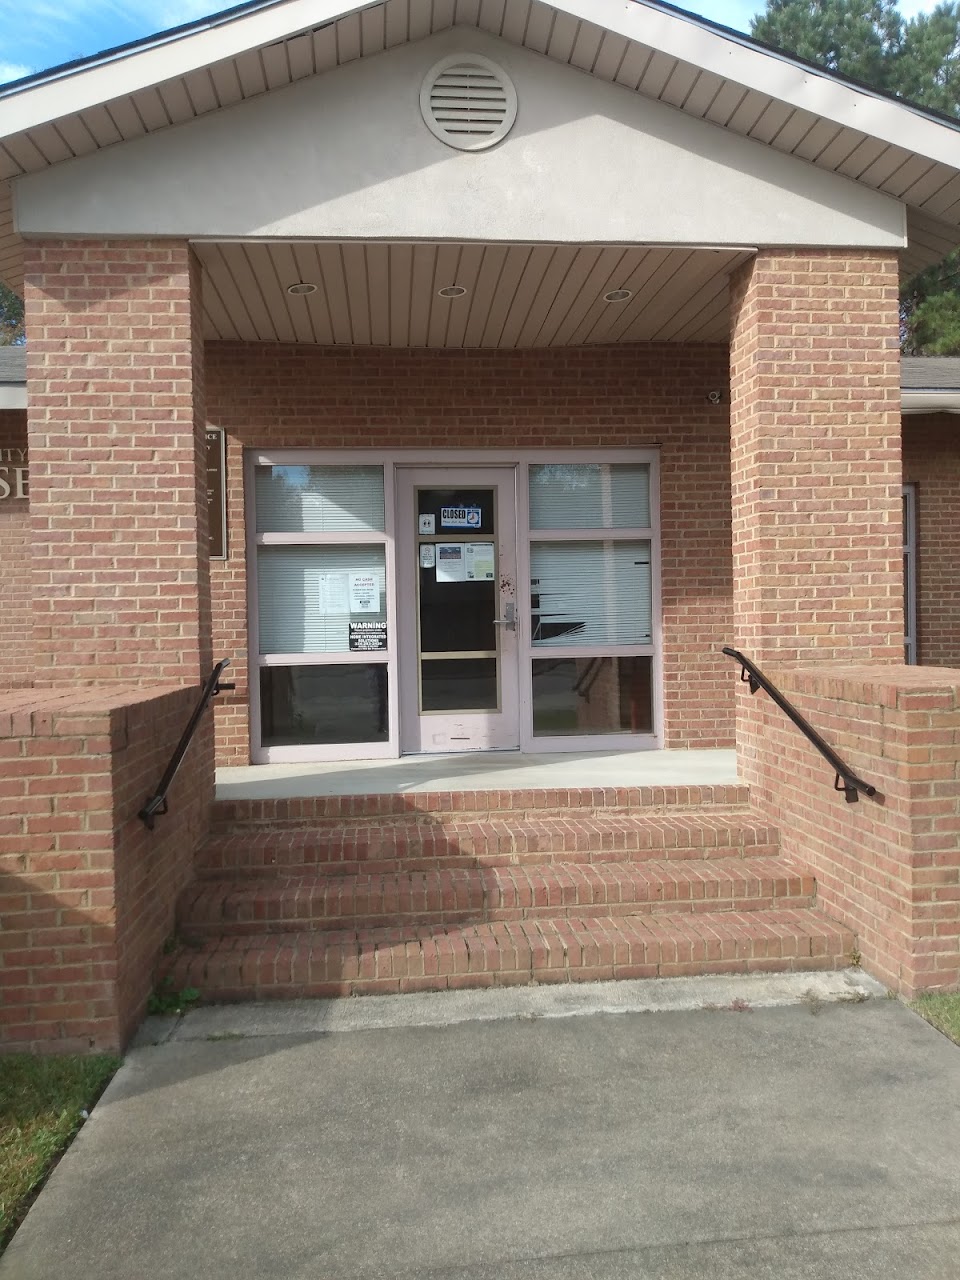 Photo of TALLASSEE HOUSING AUTHORITY. Affordable housing located at 904 Hickory Street TALLASSEE, AL 36078